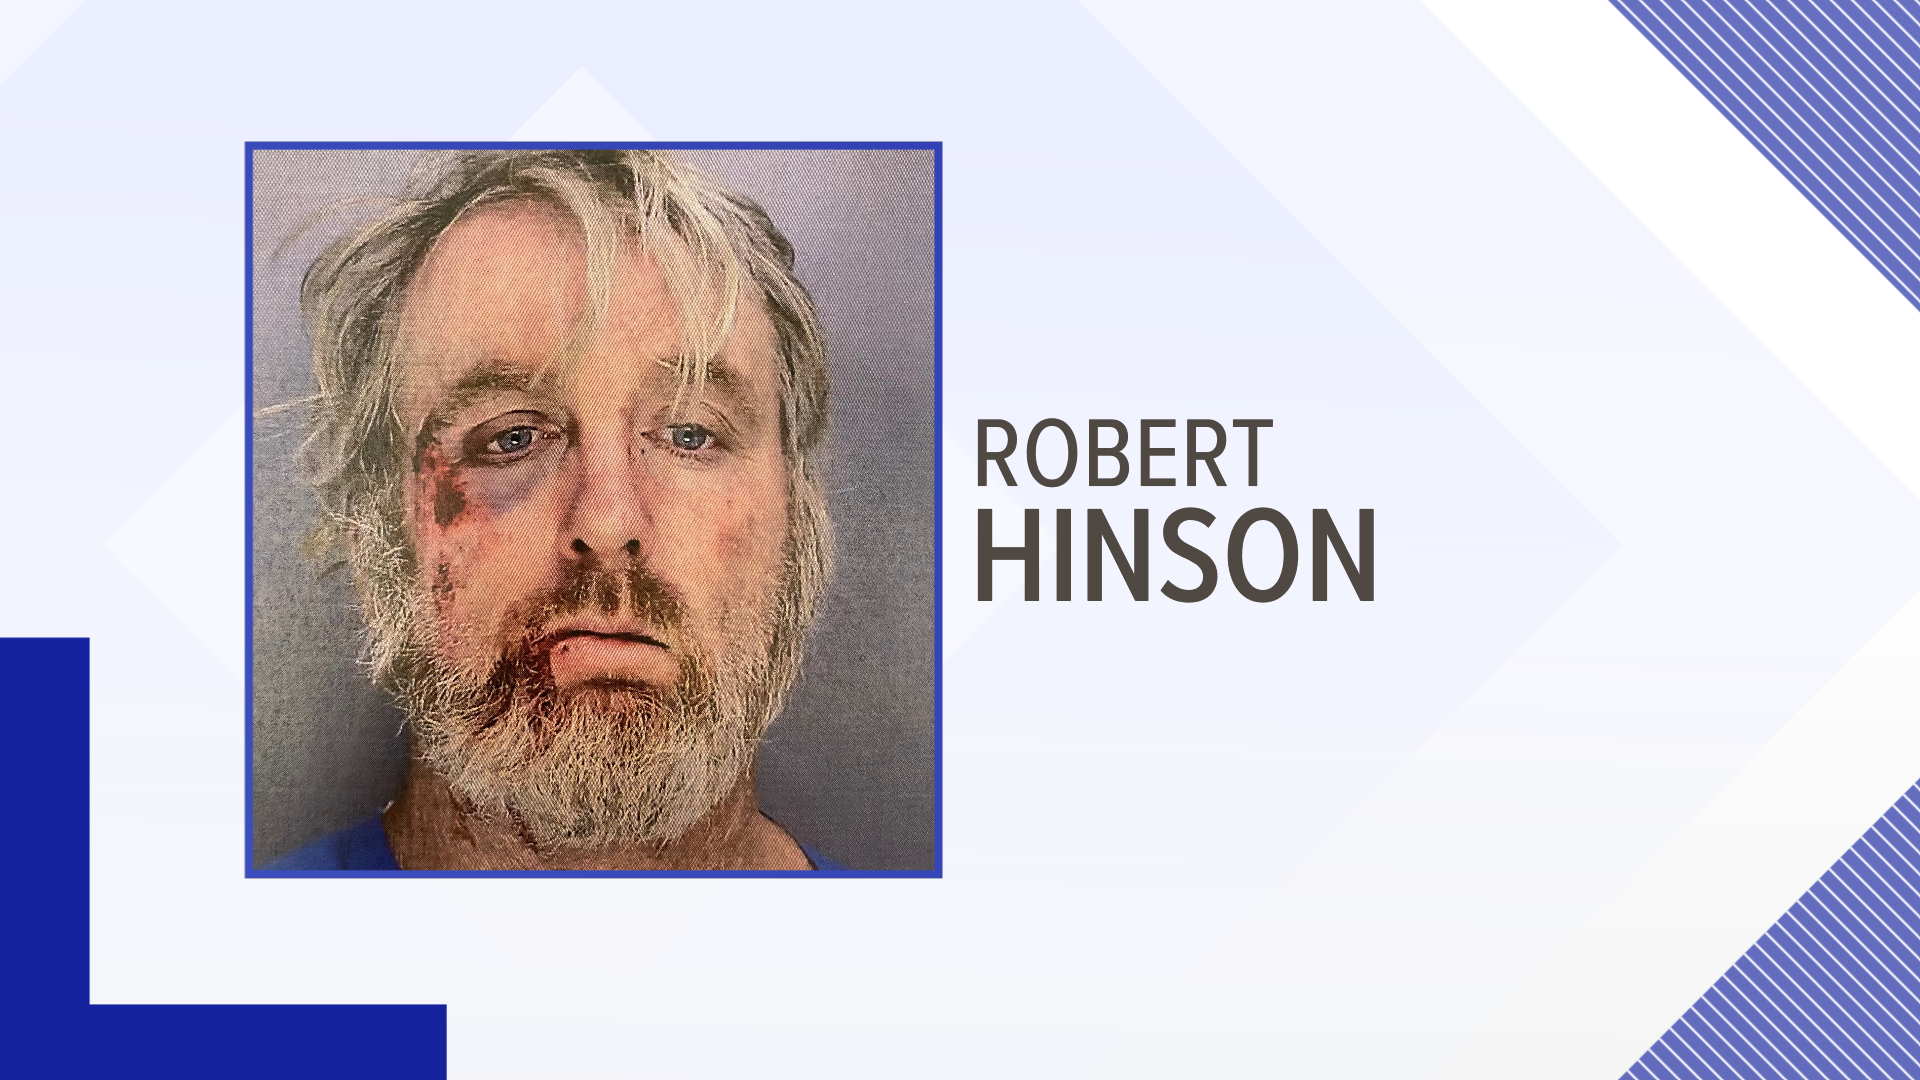 Robert Hinson was allegedly stealing scrap metal from Fiegleman's Recycling Center and fell while trying to get away.